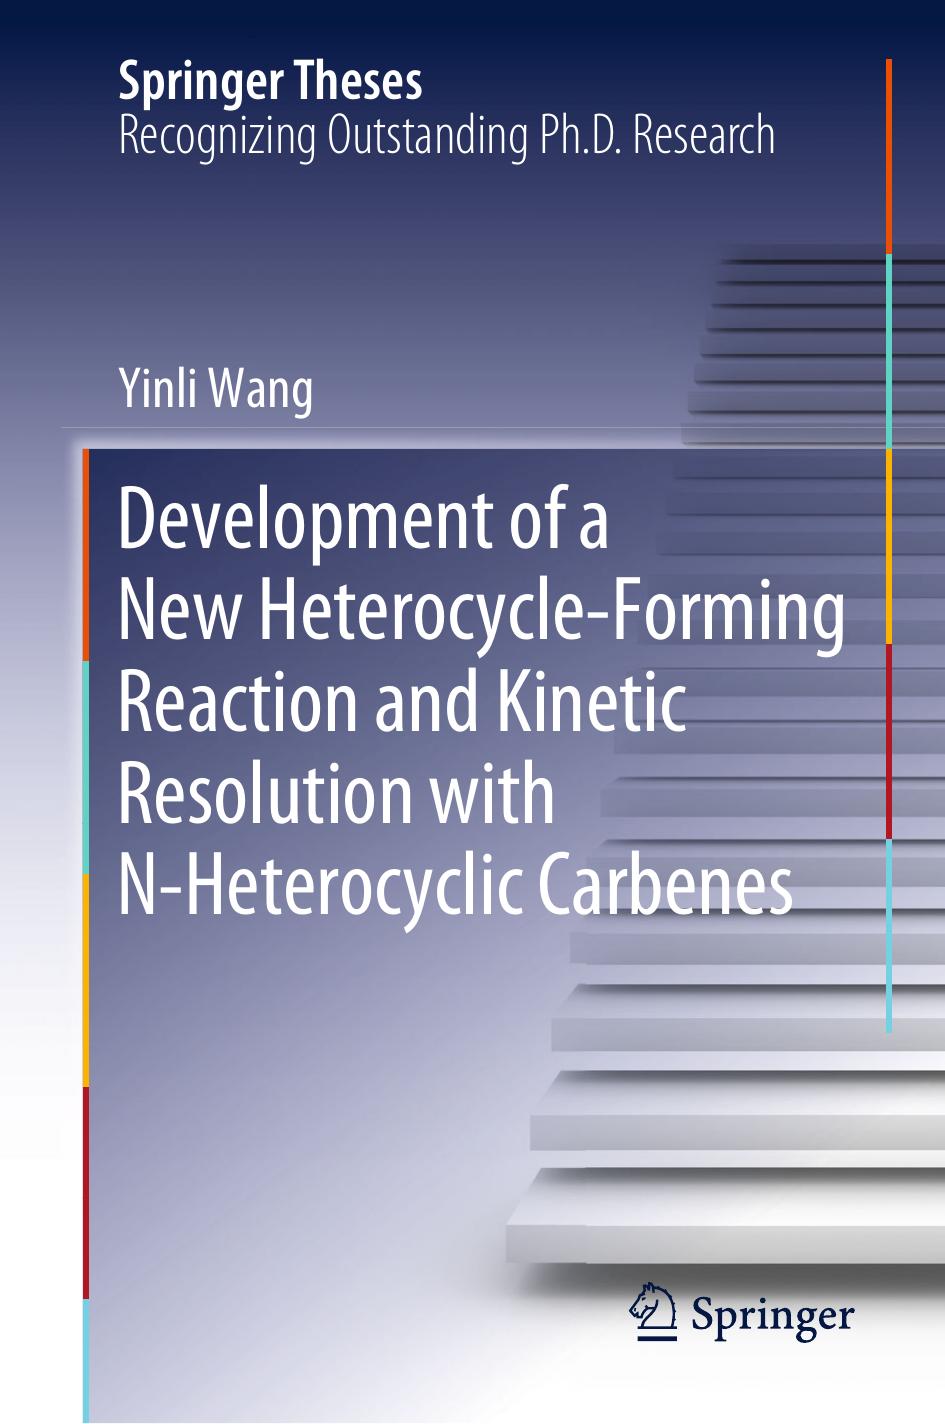 Development of a New Heterocycle-Forming Reaction and Kinetic Resolution with N-Heterocyclic Carbenes by Yinli Wang